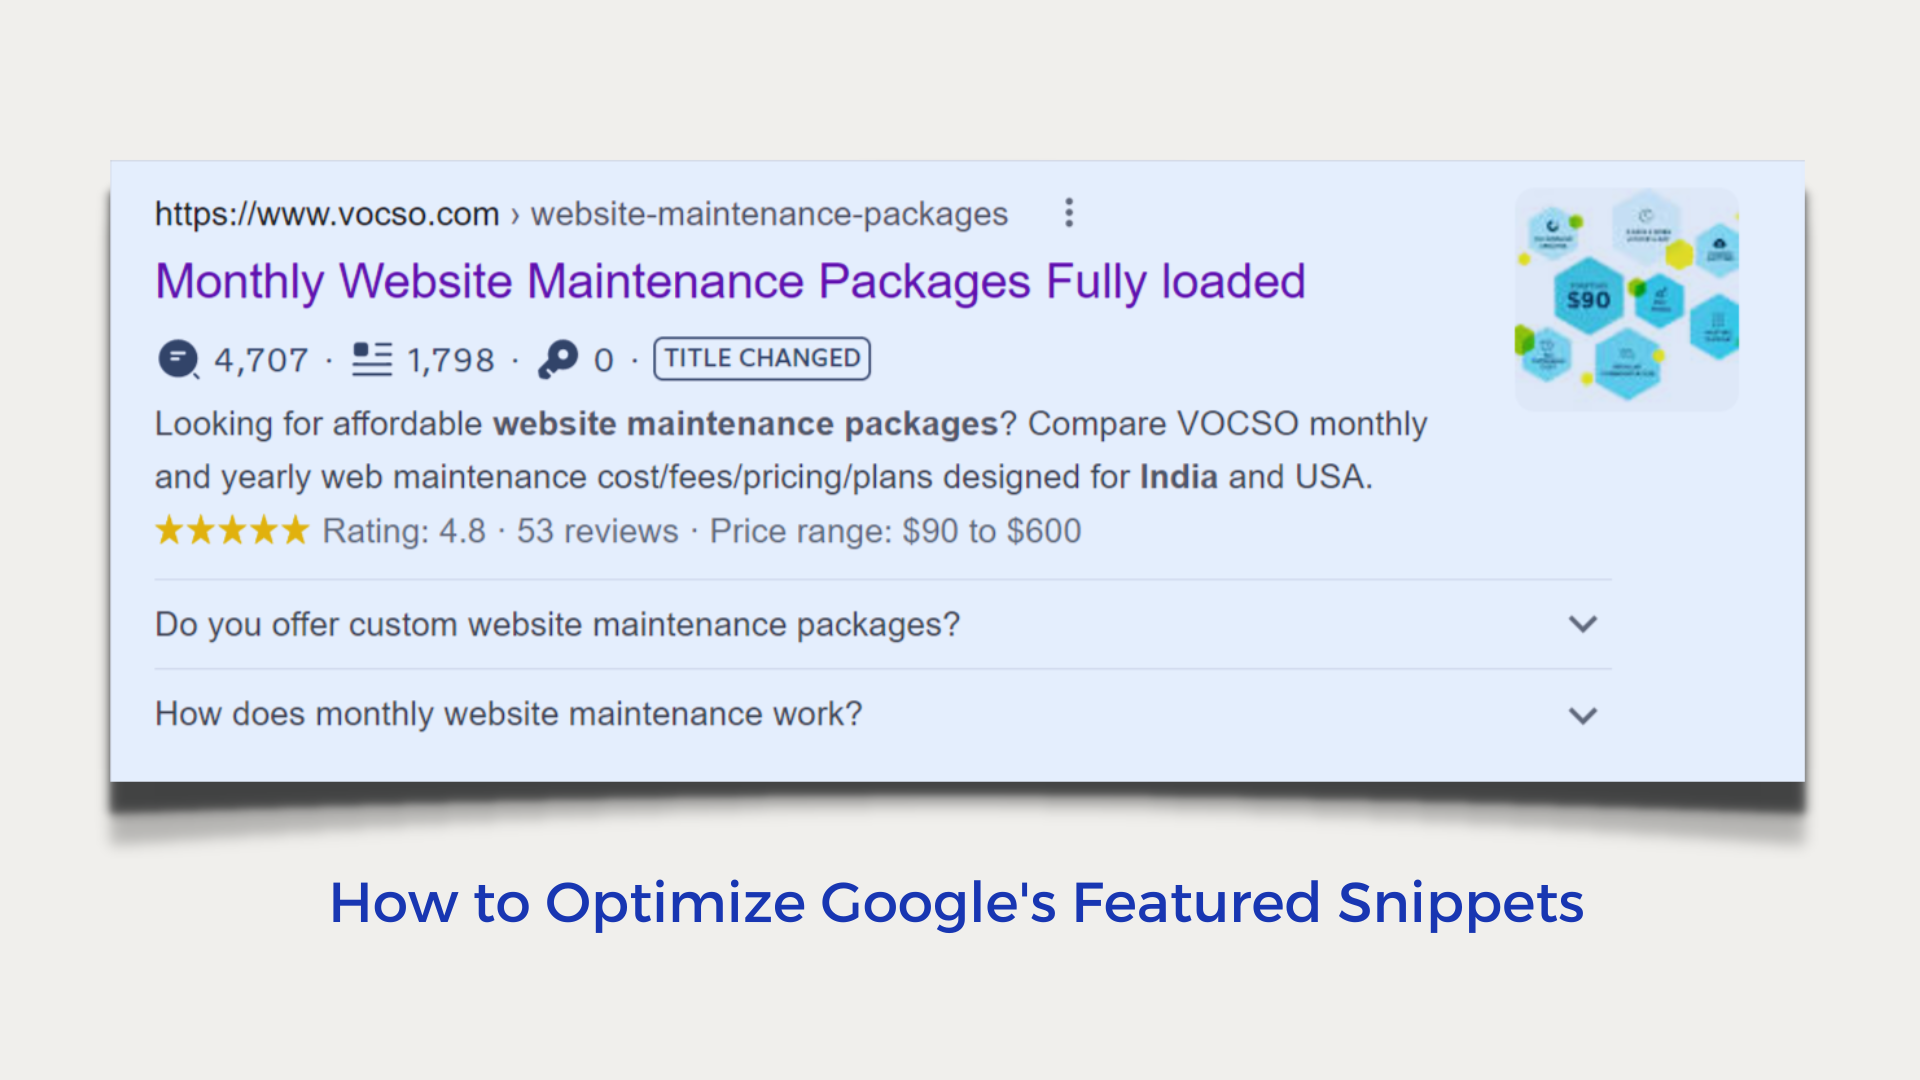 How to Optimize Google's Featured Snippets